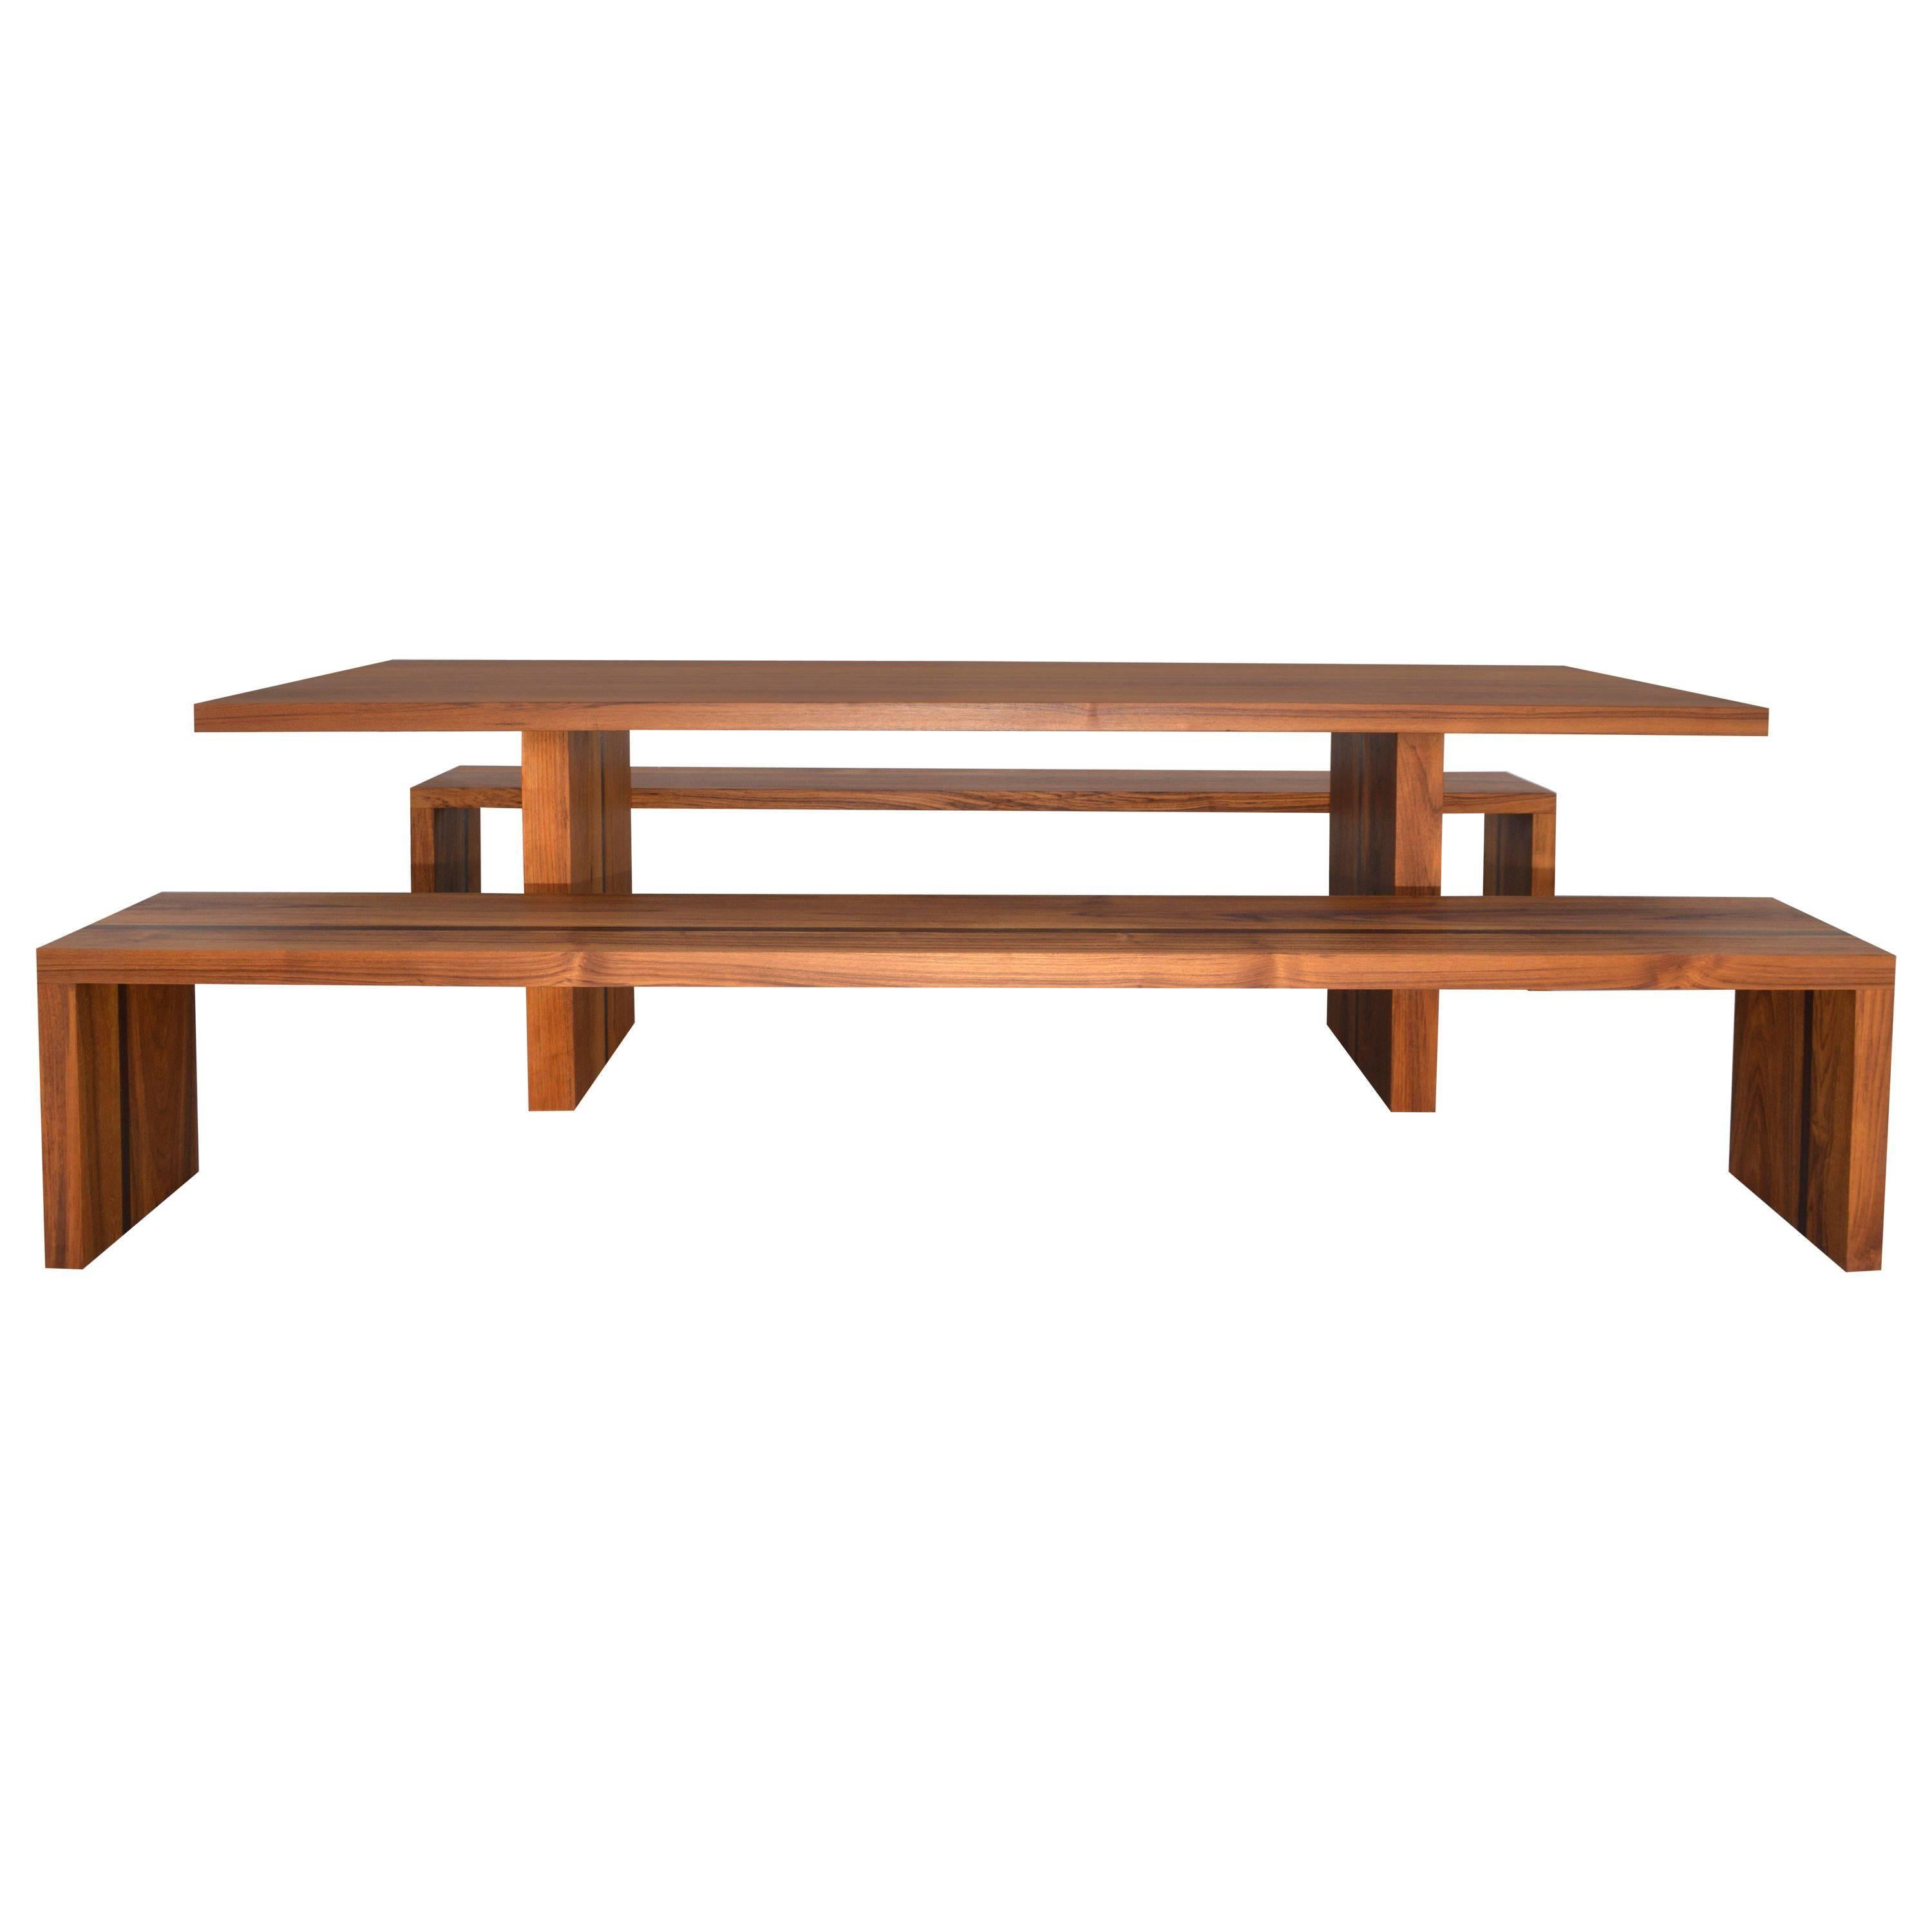 Outdoor Tables and Benches in Teak and Wenge, Custom Made by Petersen Antiques